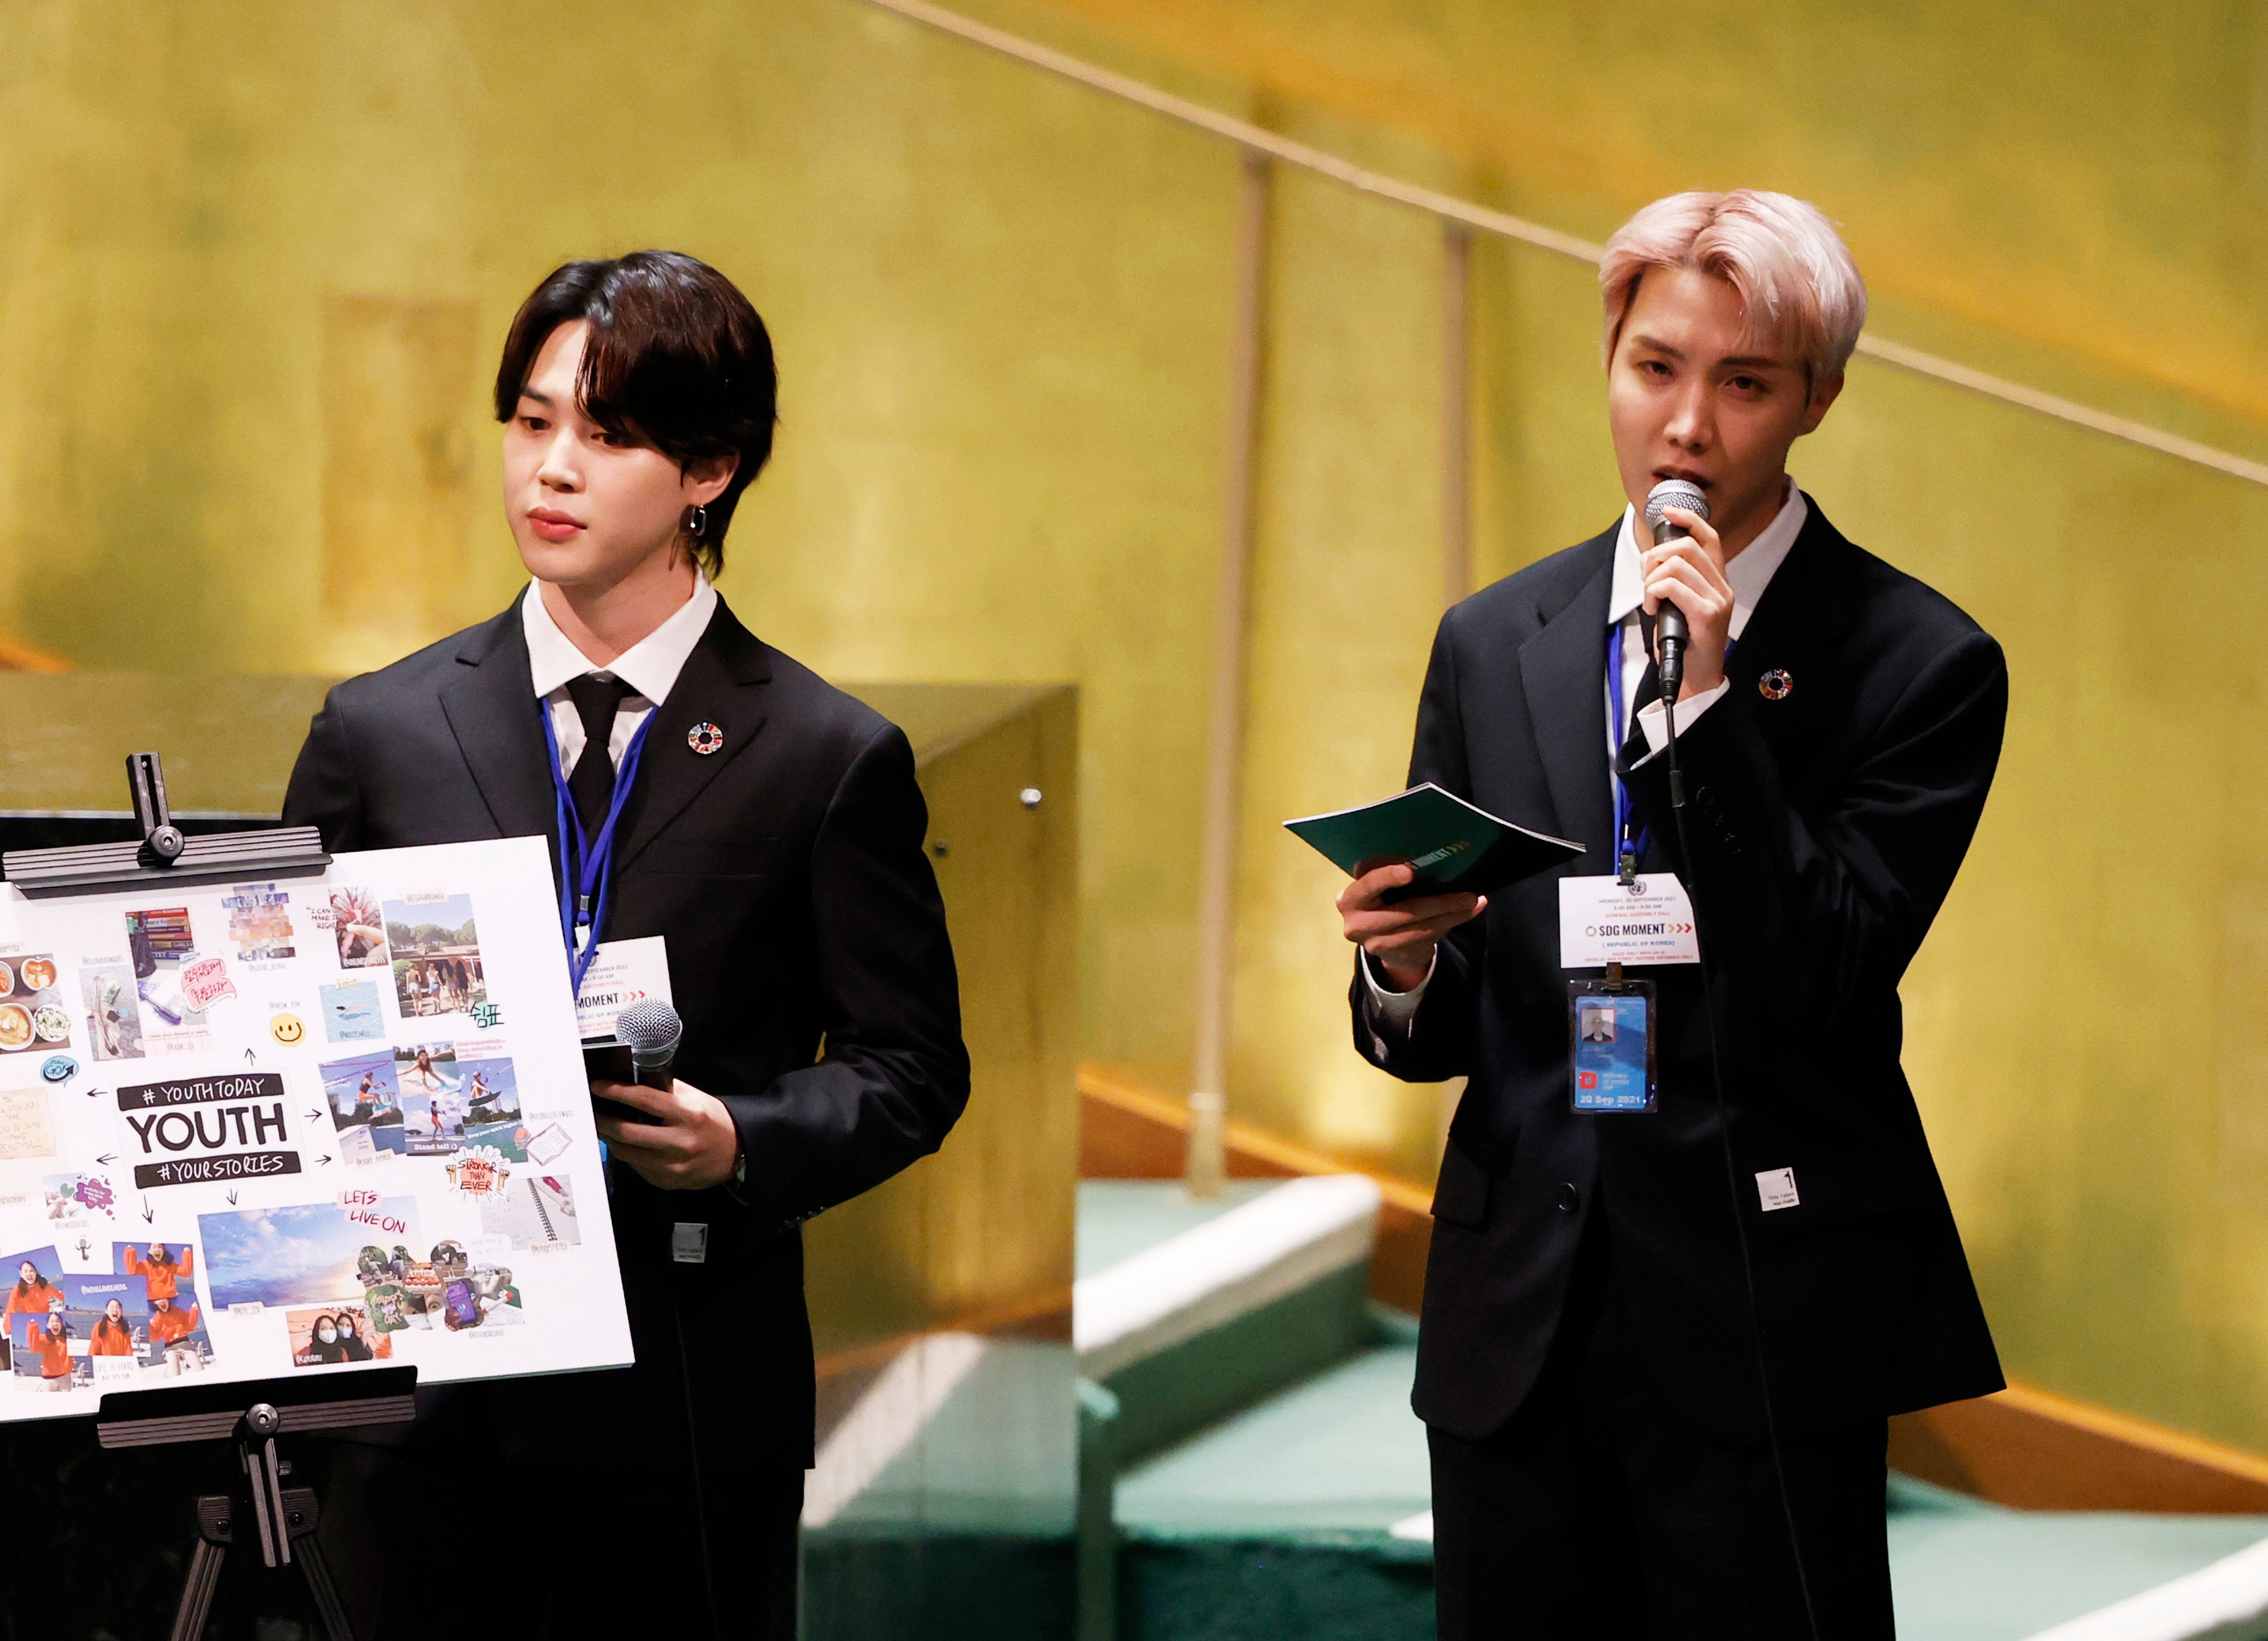 Jimin listens as J-Hope of the boy band BTS speaks at the SDG Moment event as part of the UN General Assembly 76th session General Debate